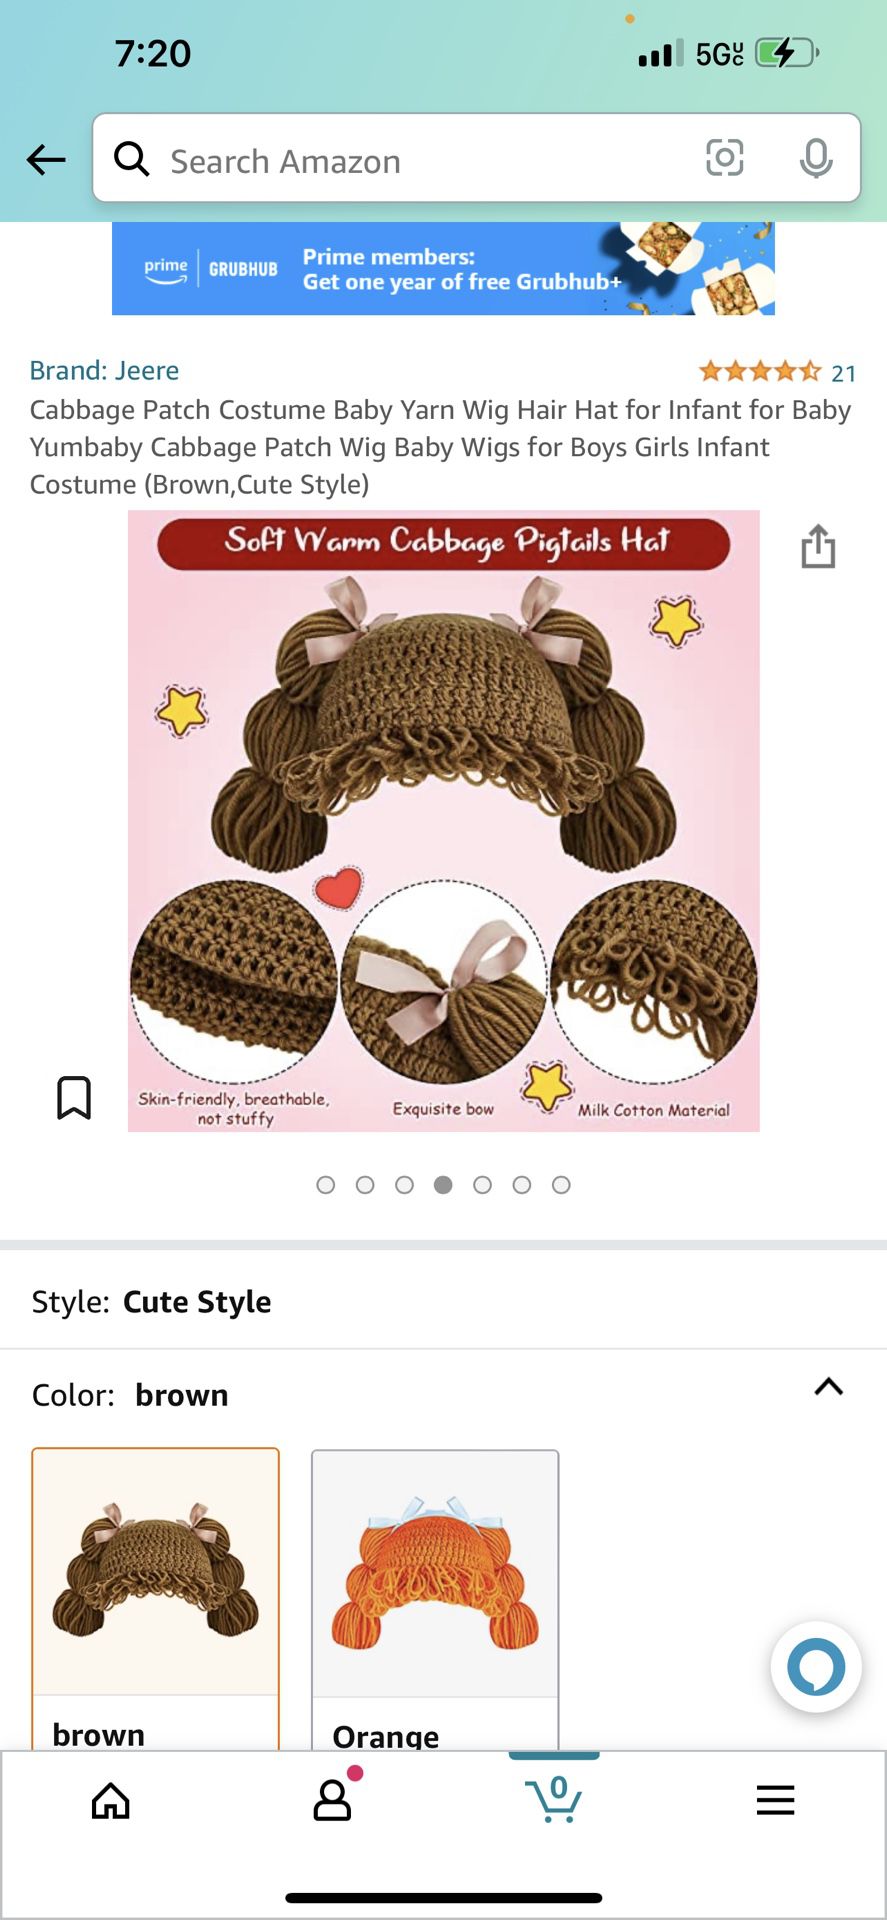 Cabbage Patch Costume Baby Yarn Wig Hair Hat for Infant for Baby Yumbaby Cabbage Patch Wig Baby Wigs for Boys Girls Infant Costume (Brown,Cute Style)